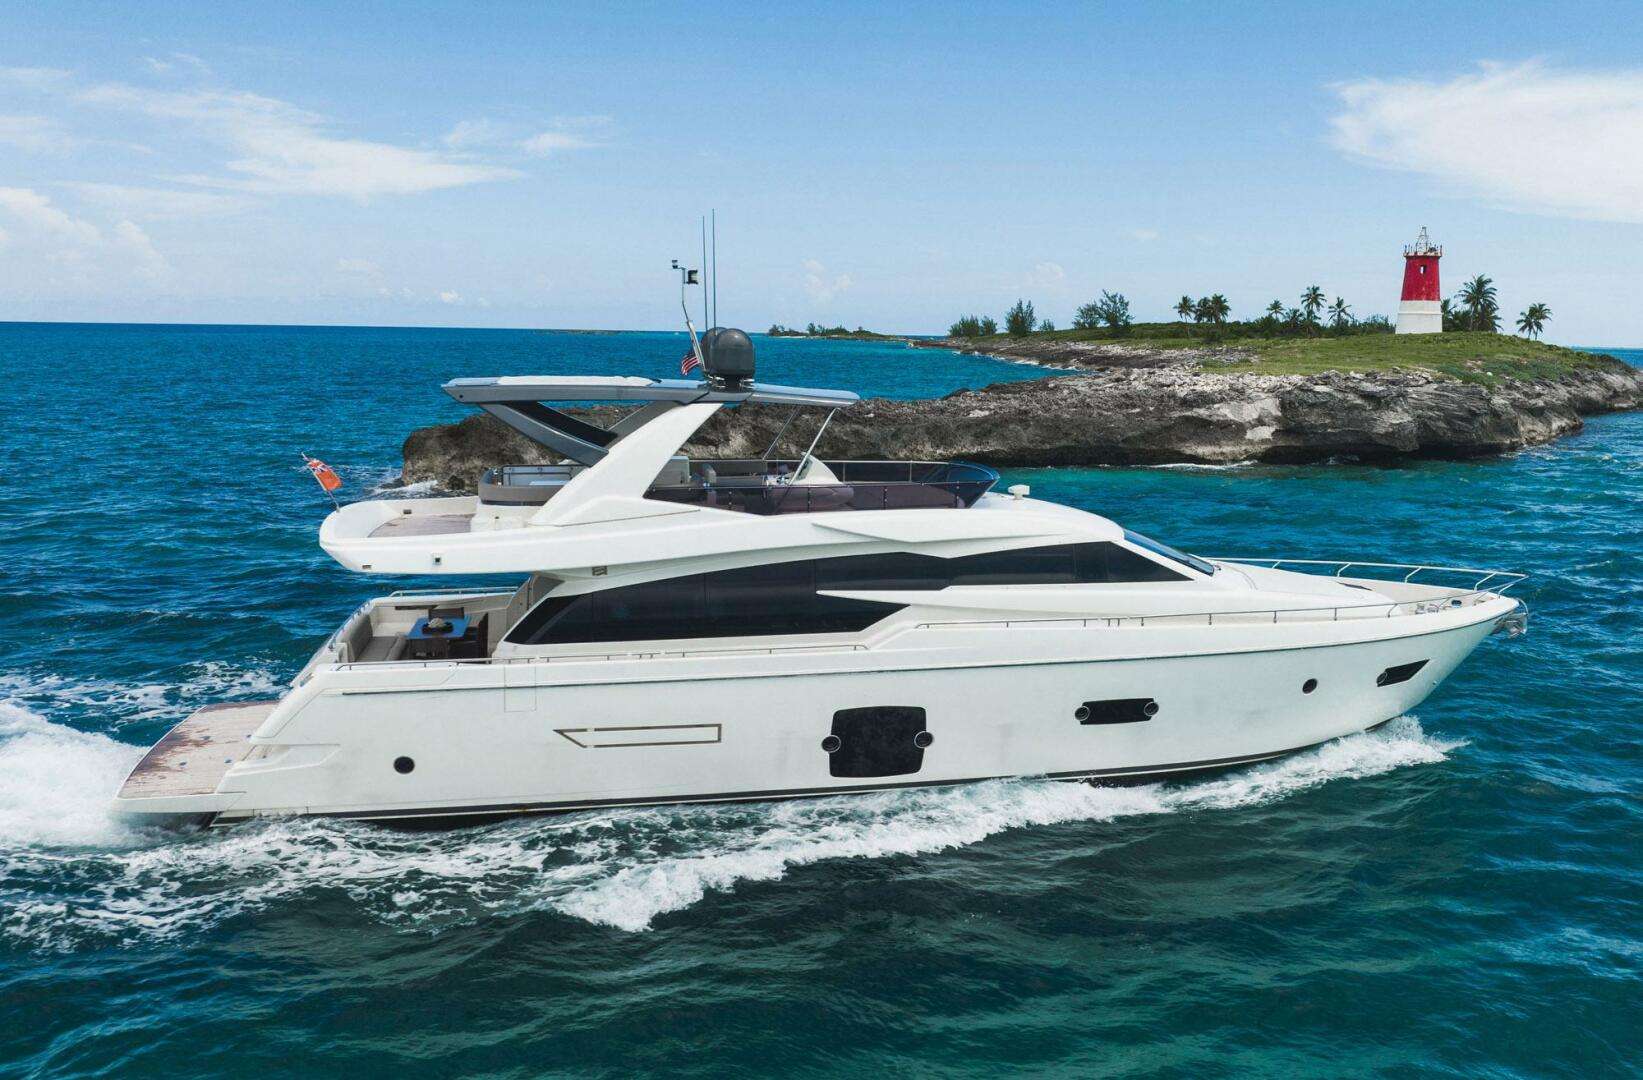 KUDU - Yacht Charter Fort Lauderdale & Boat hire in US East Coast & Bahamas 1